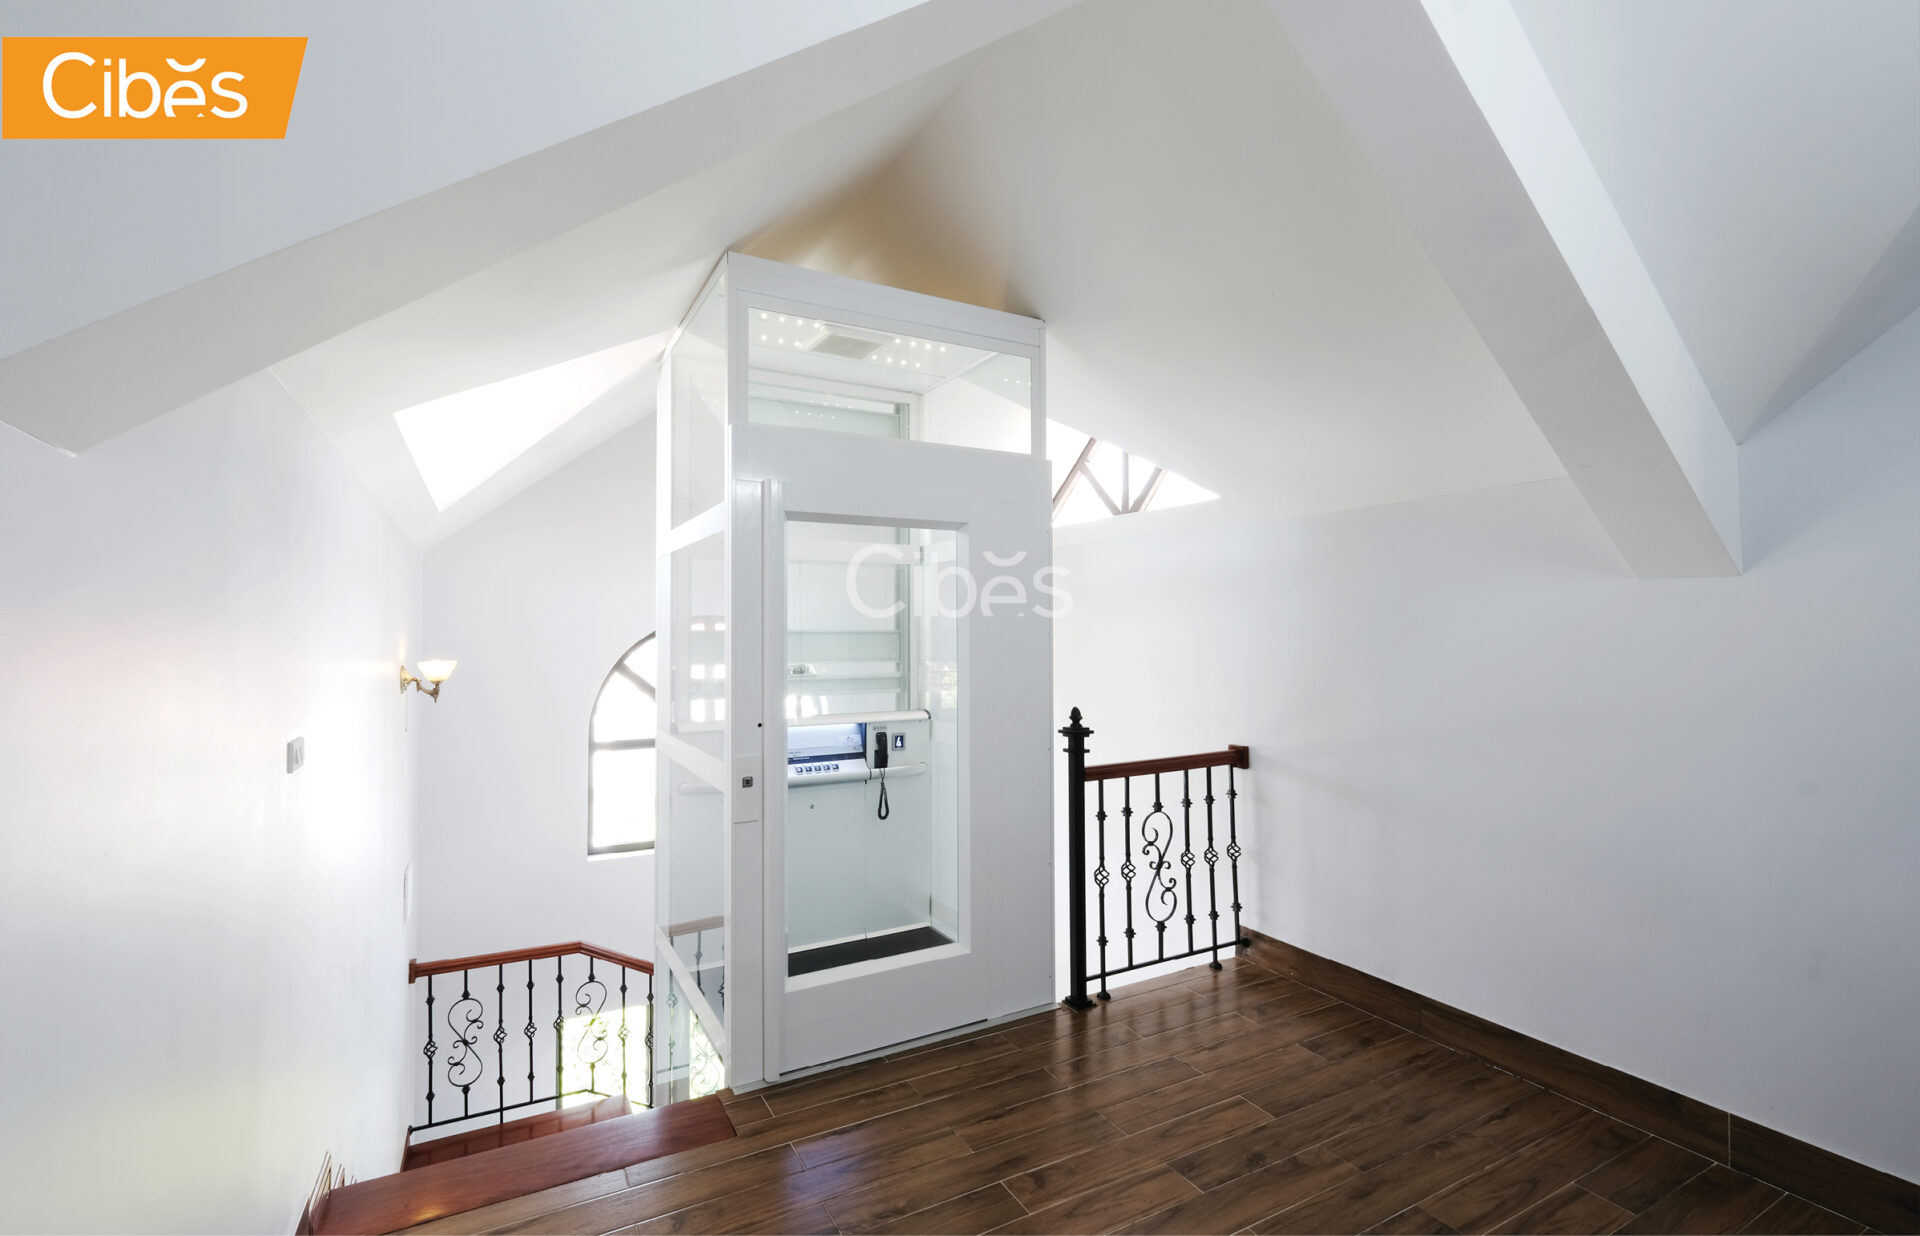 HOME LIFTS – Middle of stairs clas40